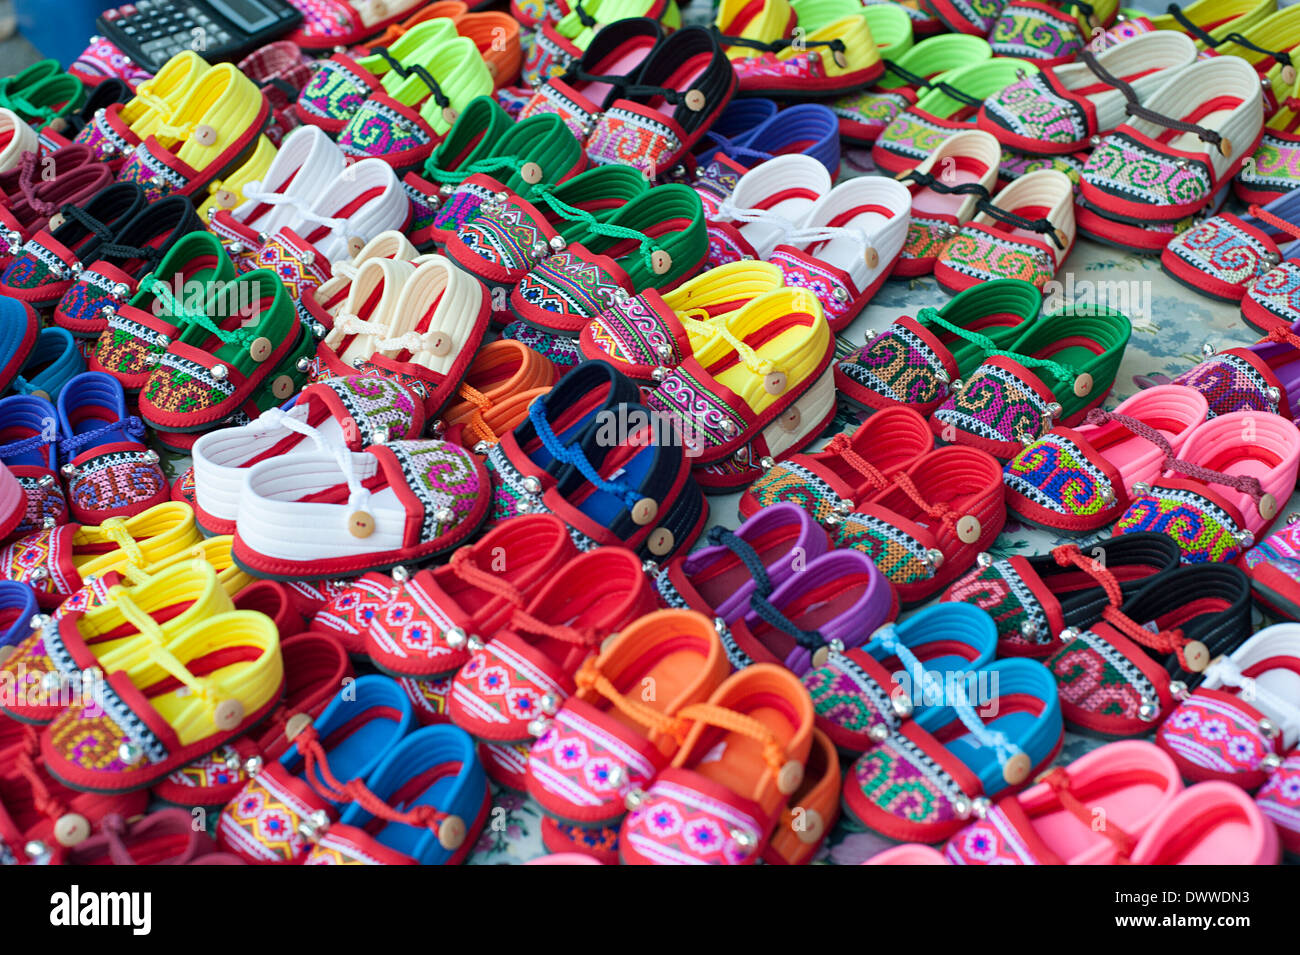 Brightly colored kids shoes for sale in 